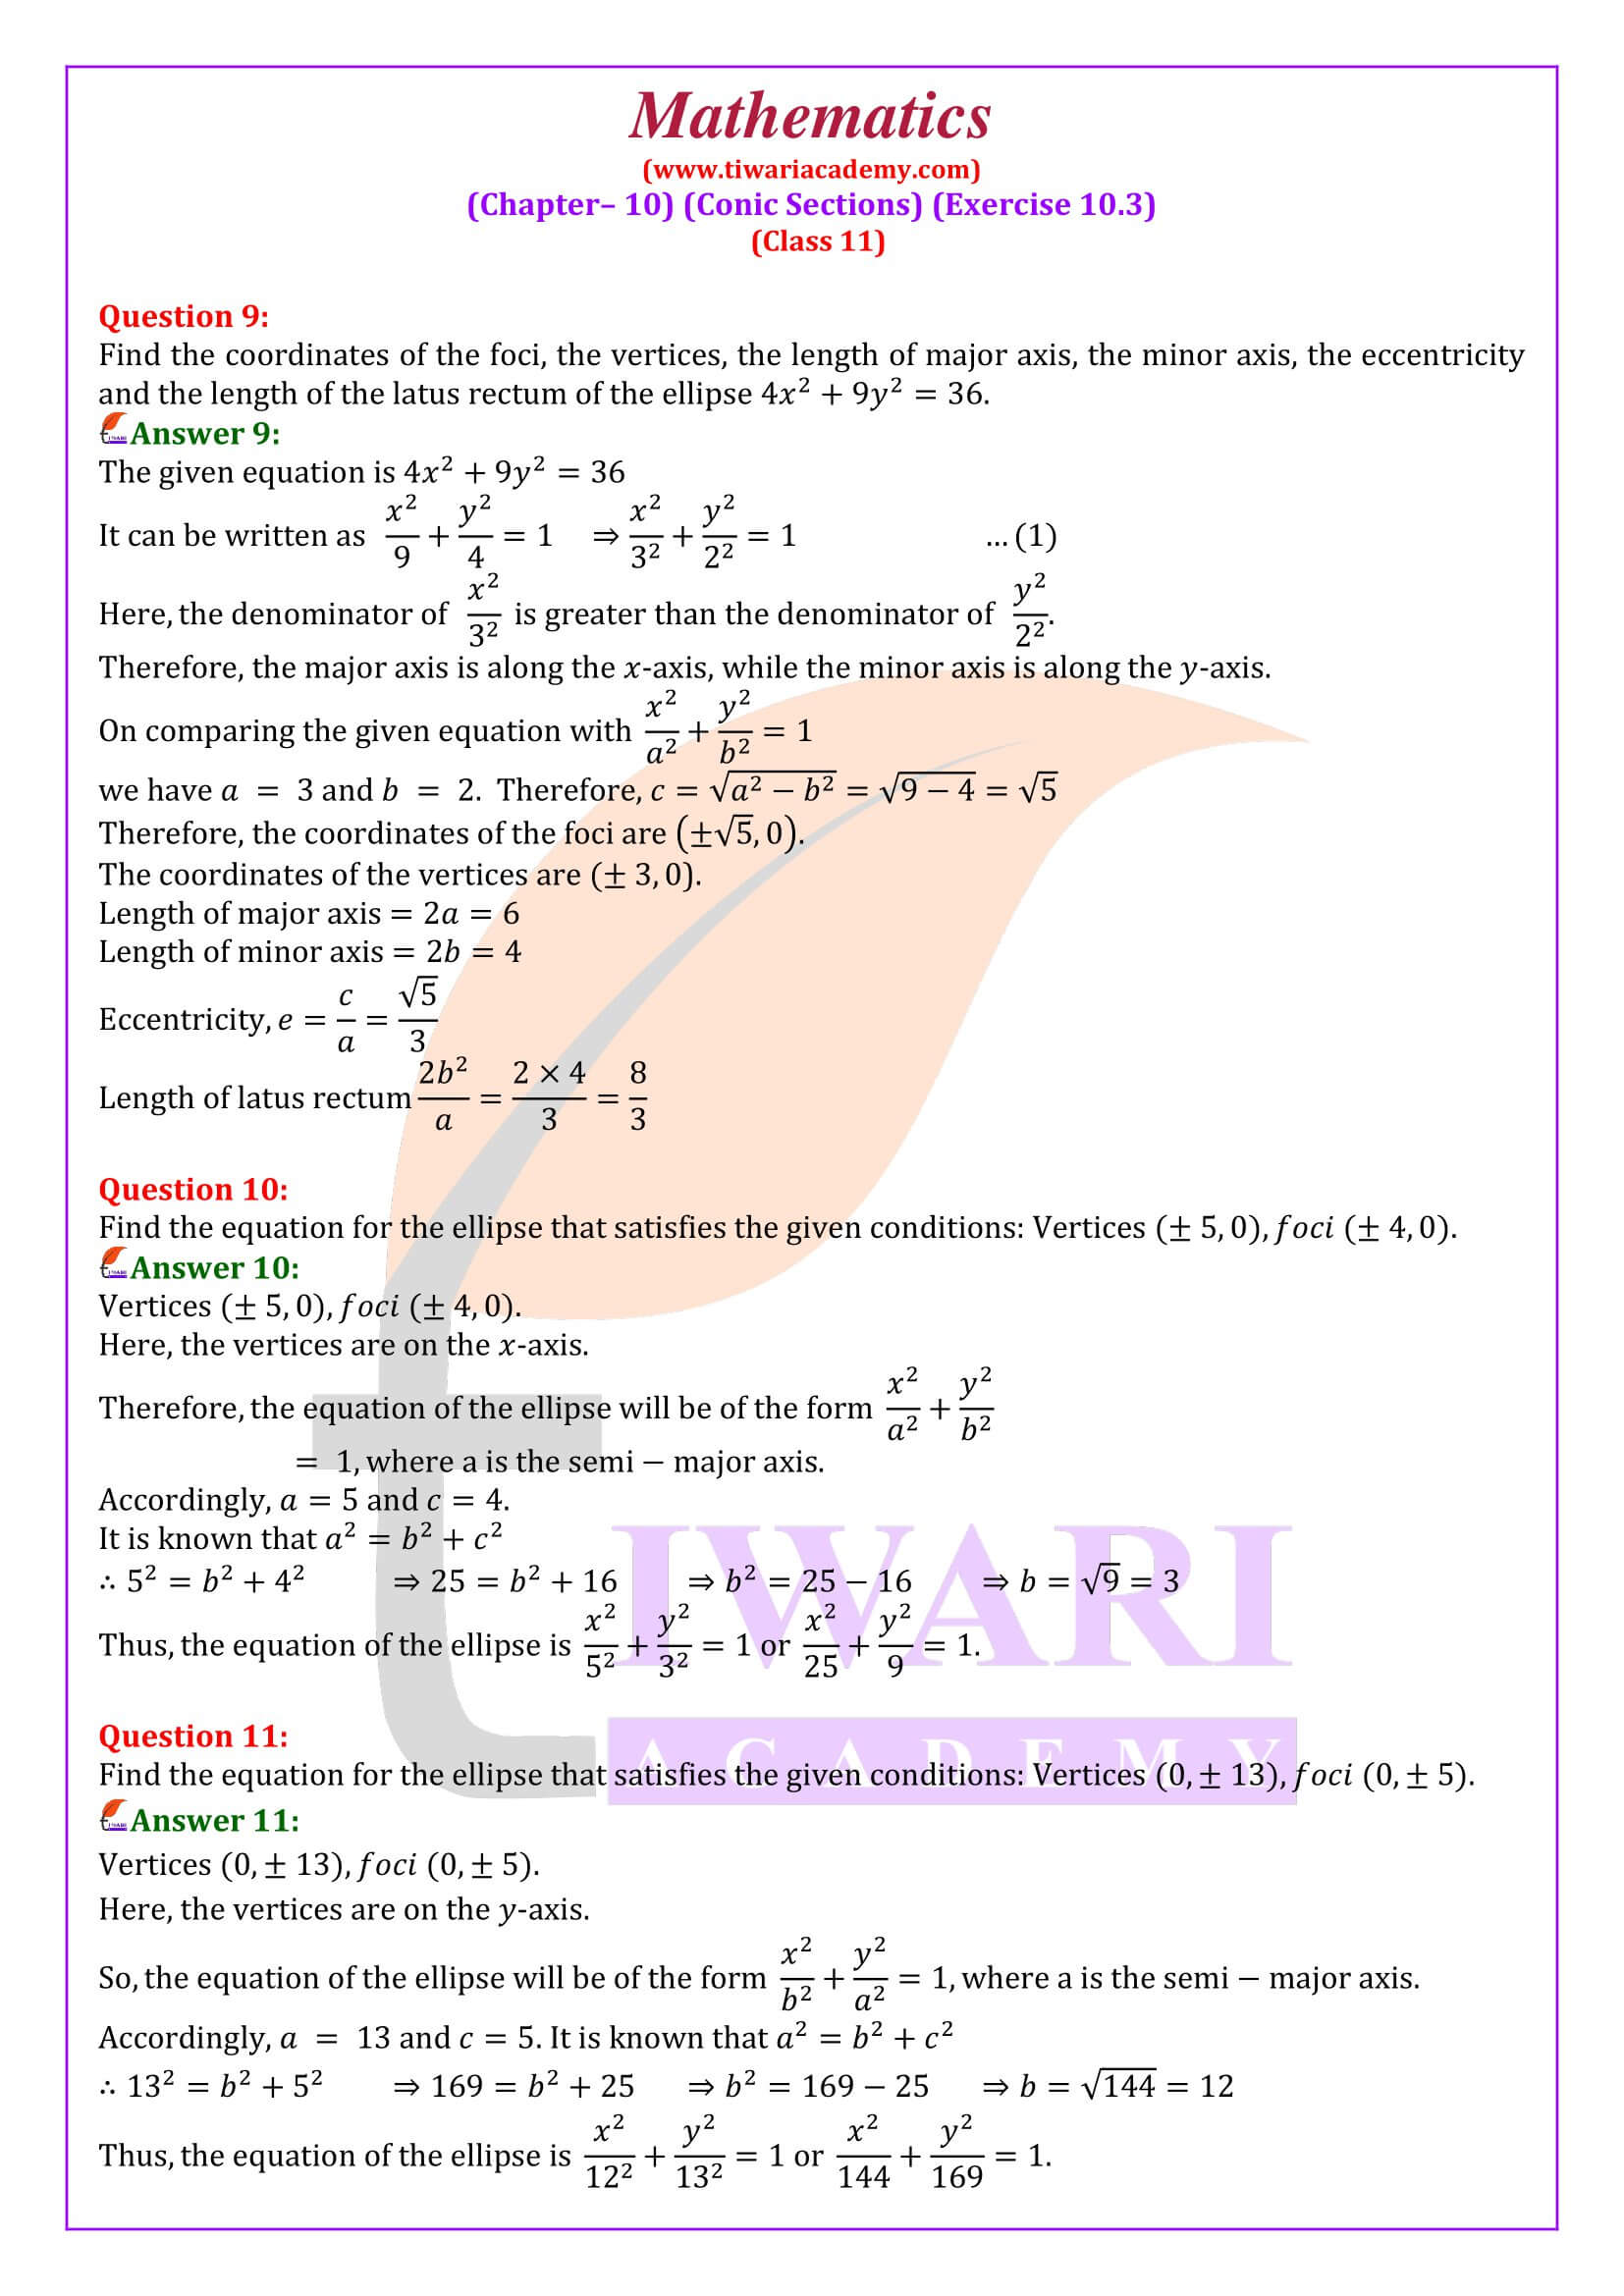 Class 11 Maths Chapter 10 Exercise 10.3 revised solutions